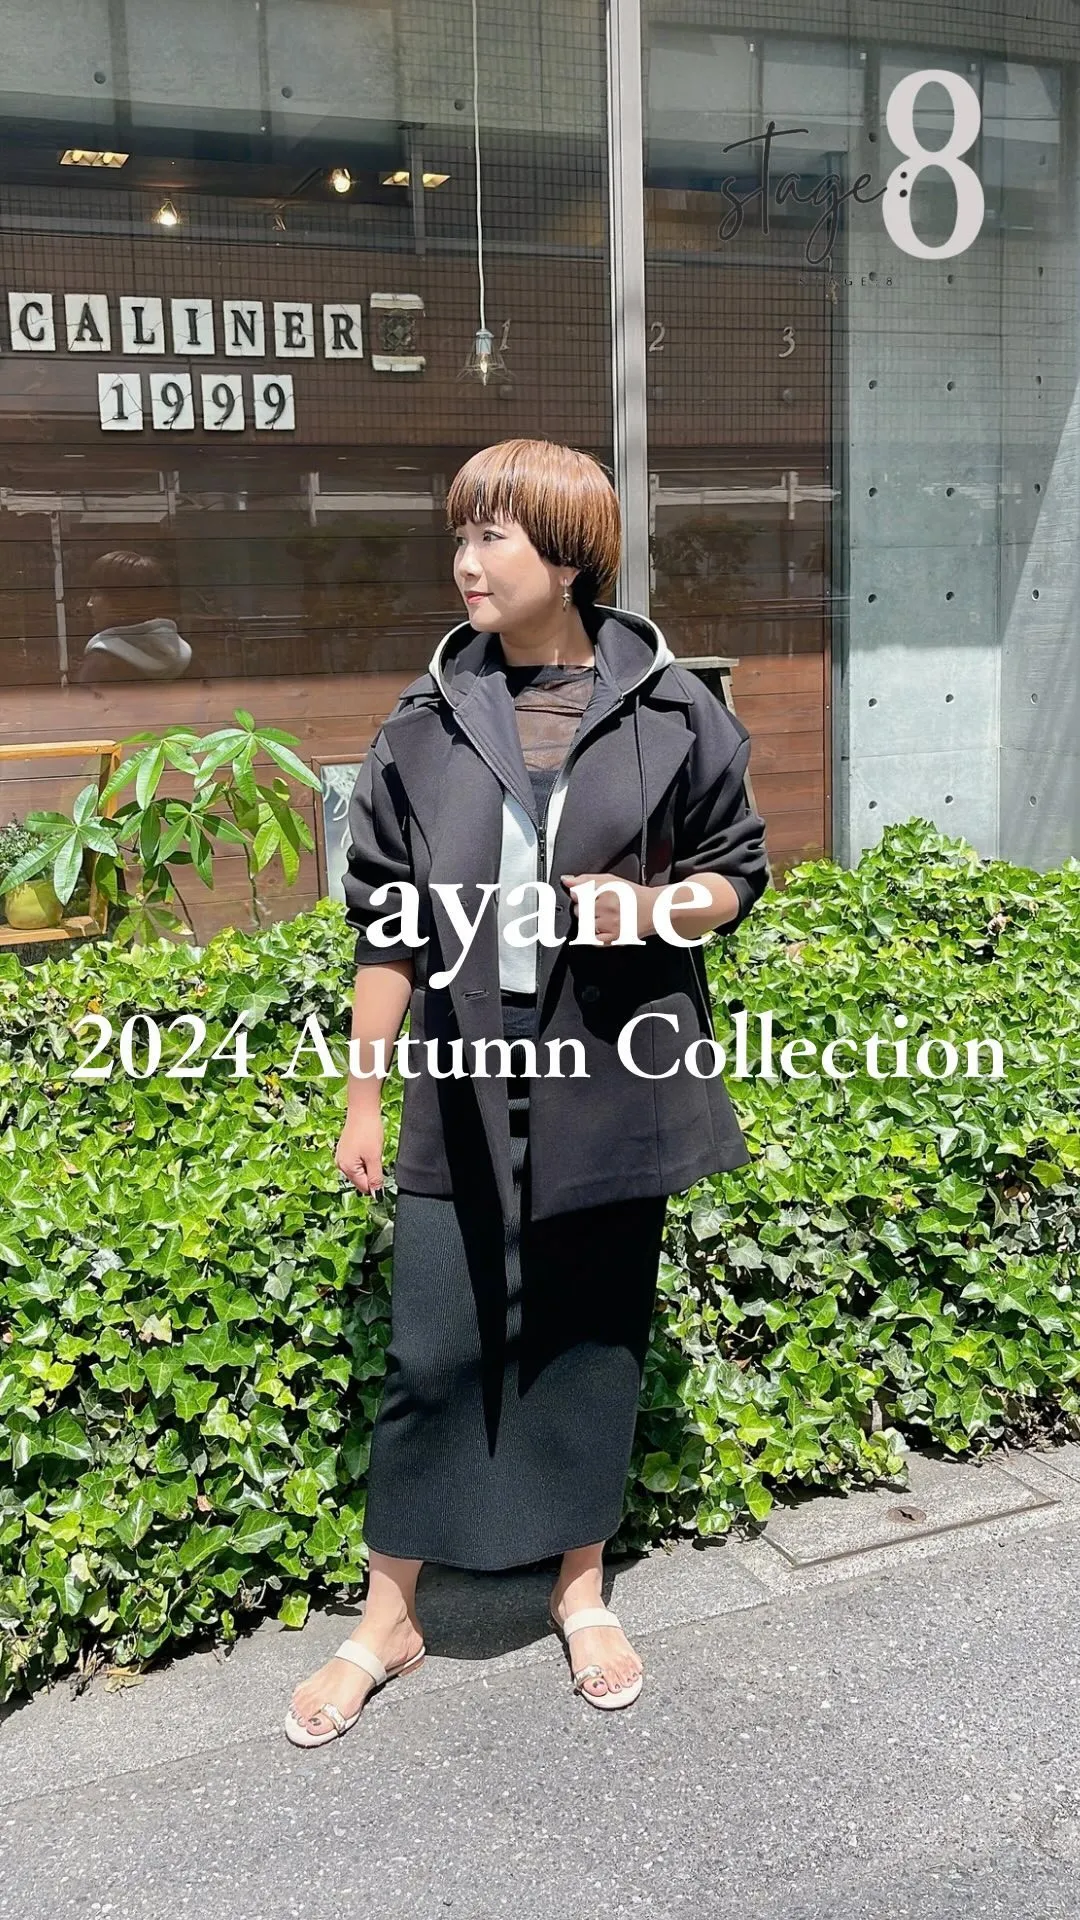 ayane 2024 Autumn Collection